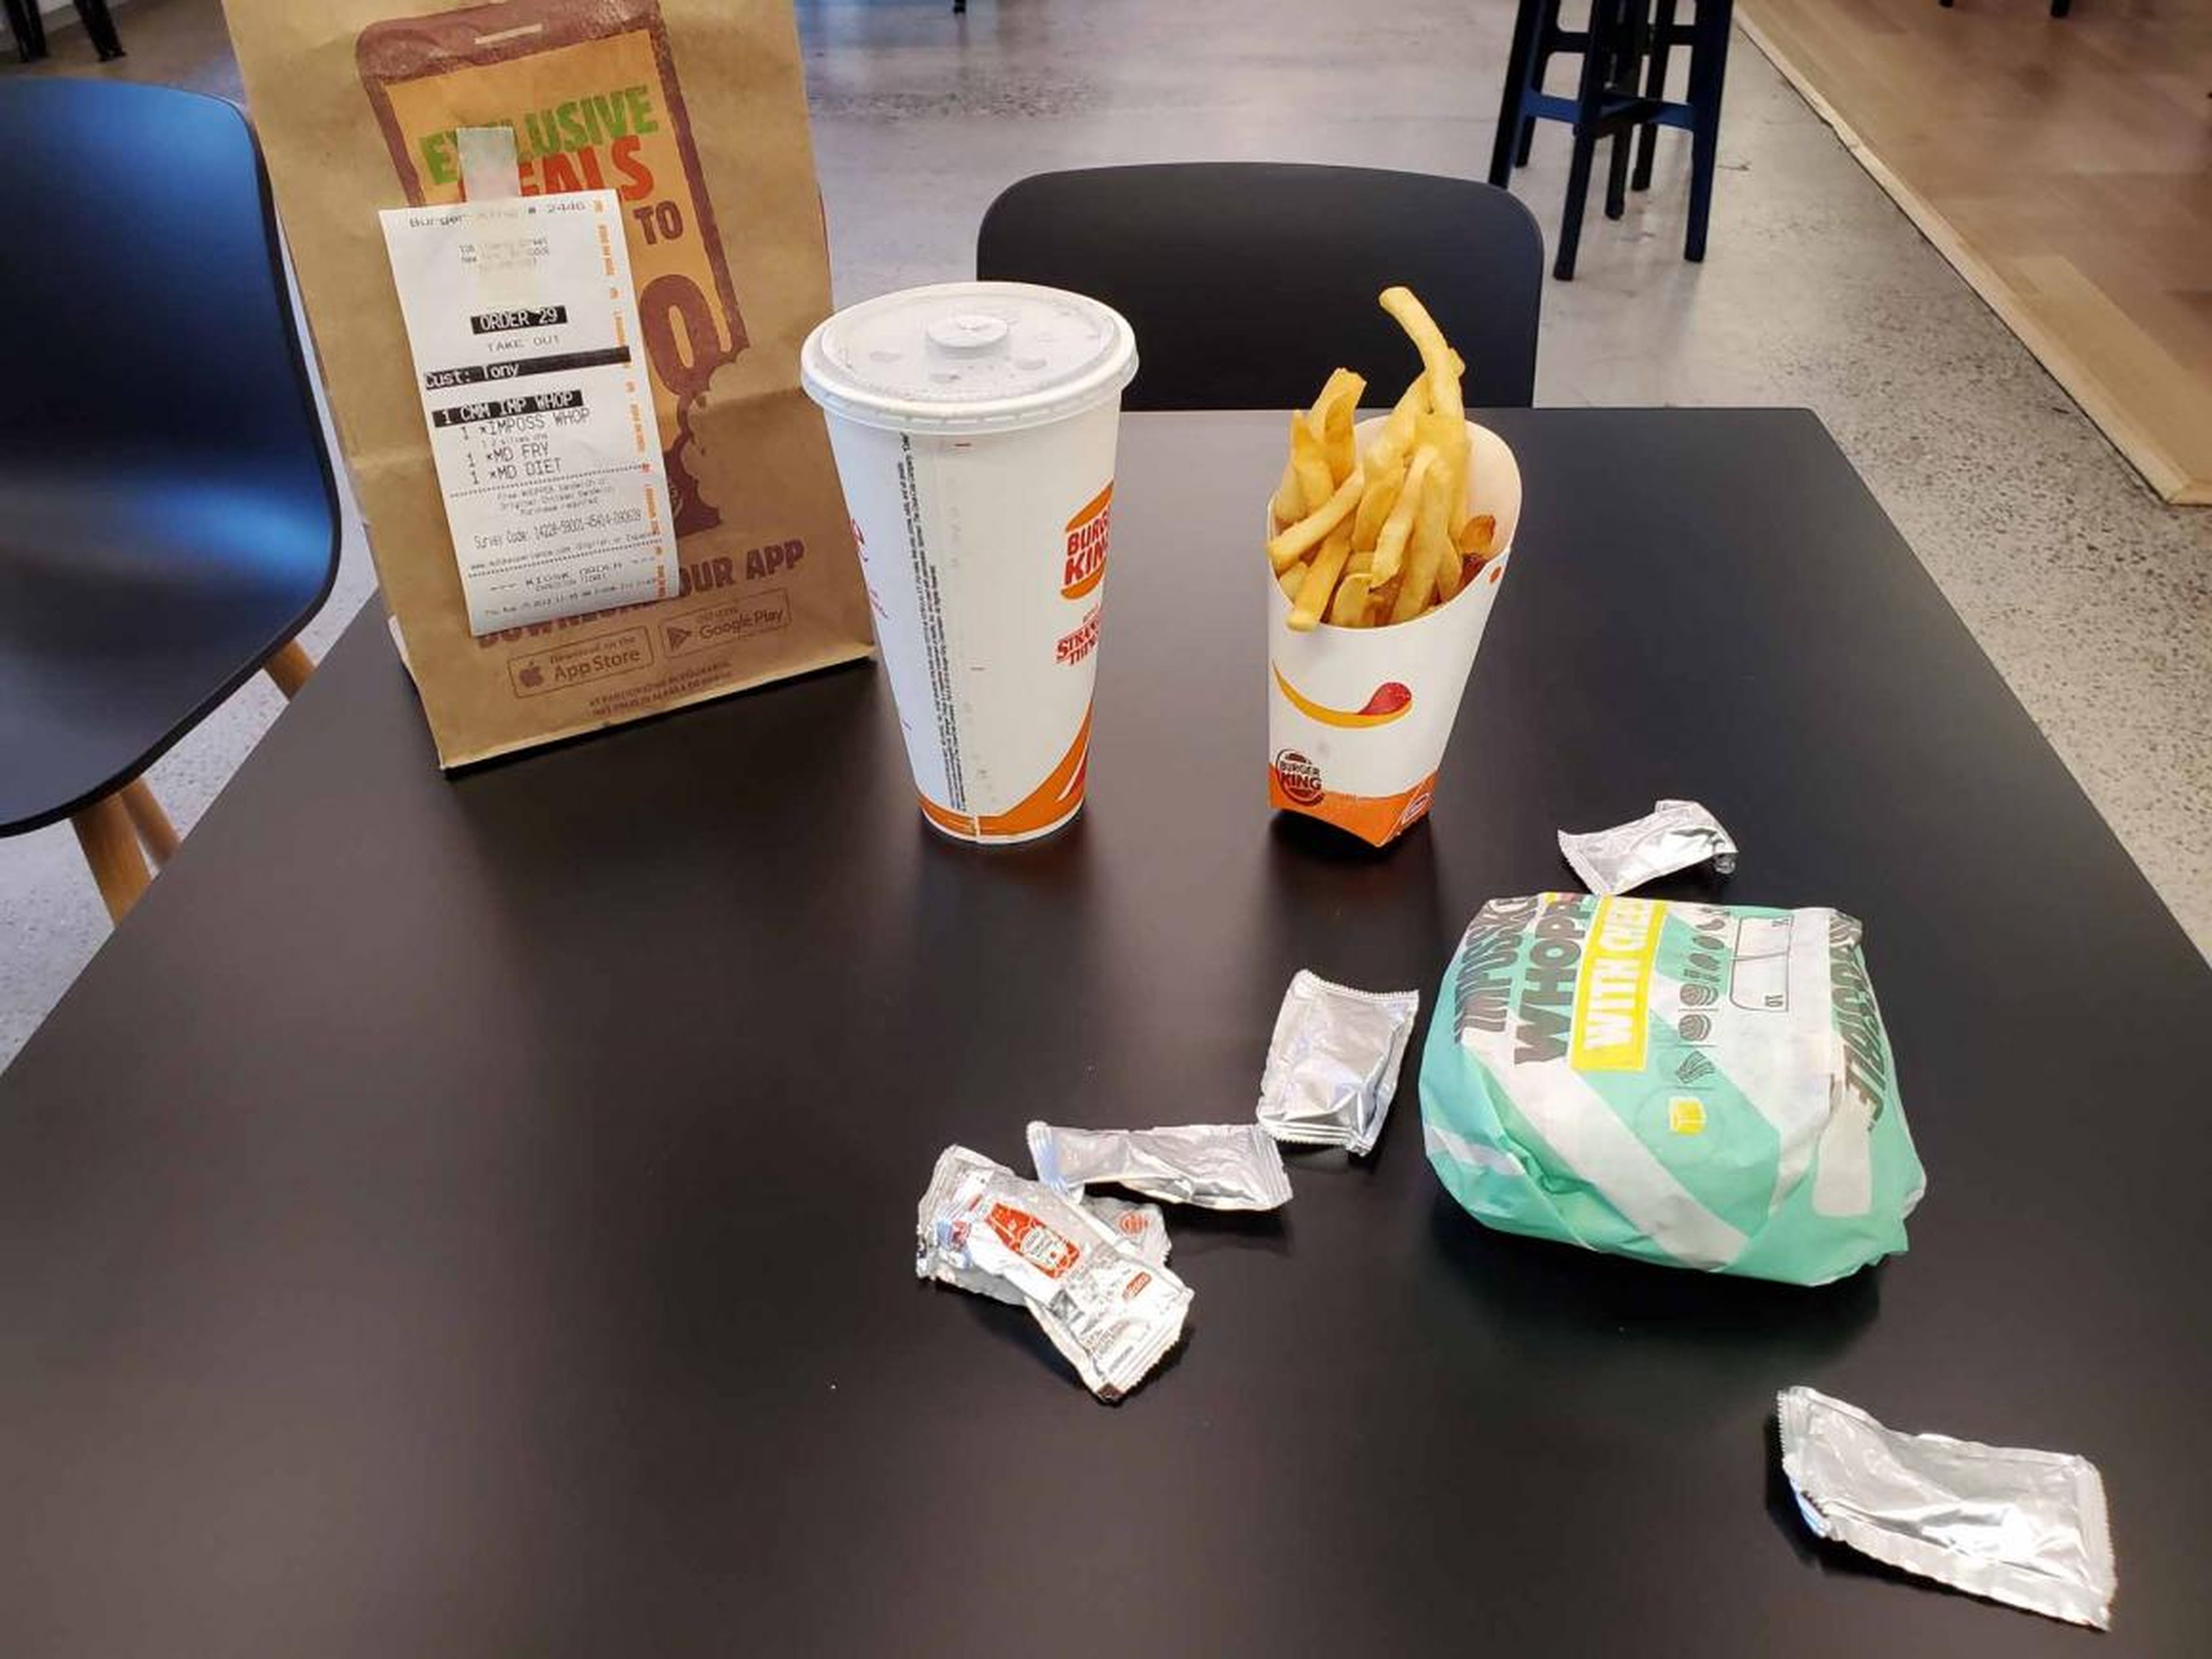 The contents of the Impossible Whopper meal look identical to a regular Whopper meal.